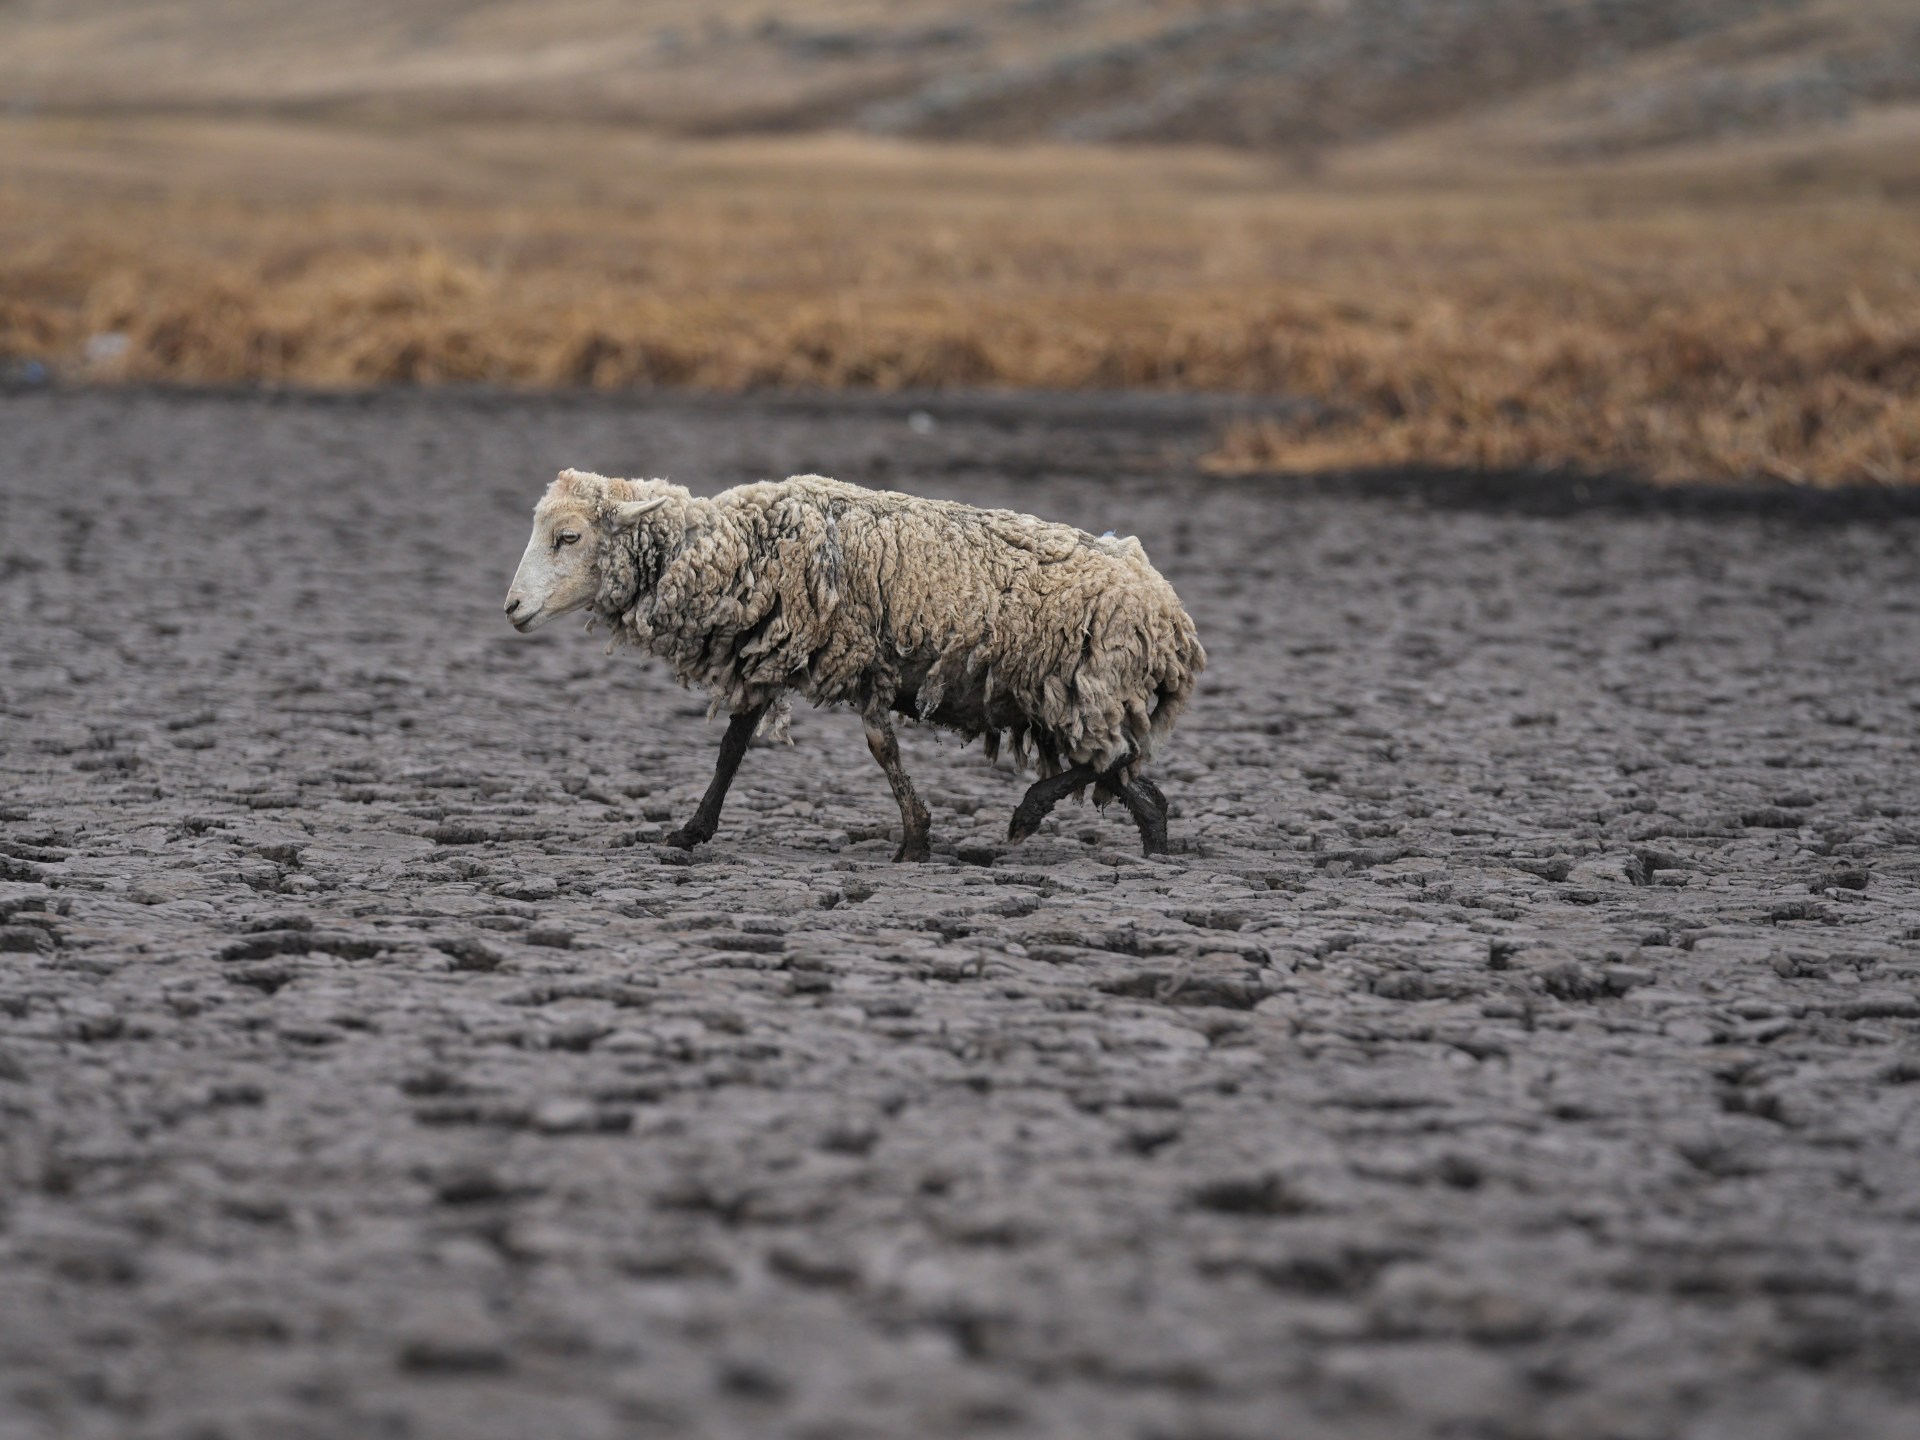 Images: Lagoon dries up as Peru’s southern Andes faces drought